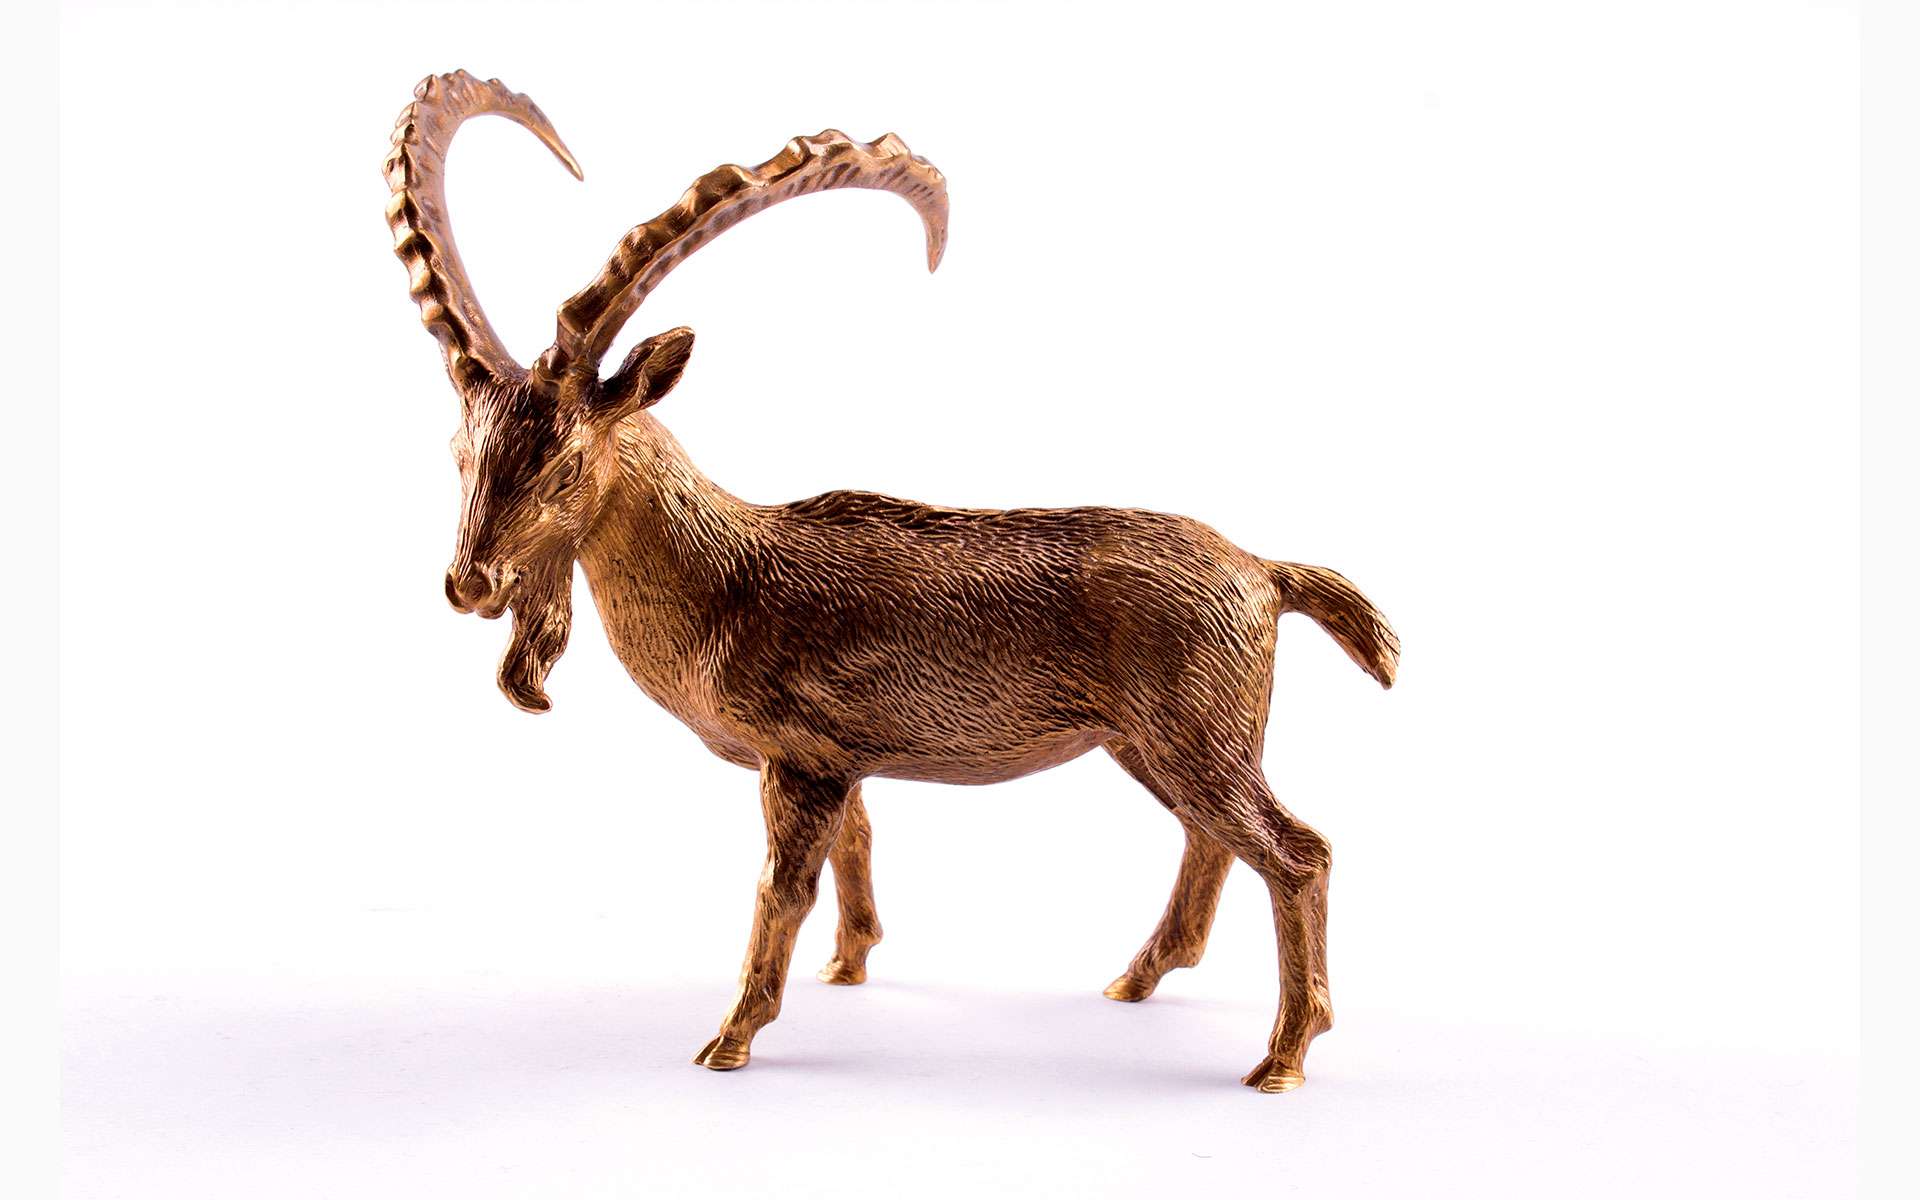 Bronze statuette Bezoar ibex, A good gift for an animal collection.